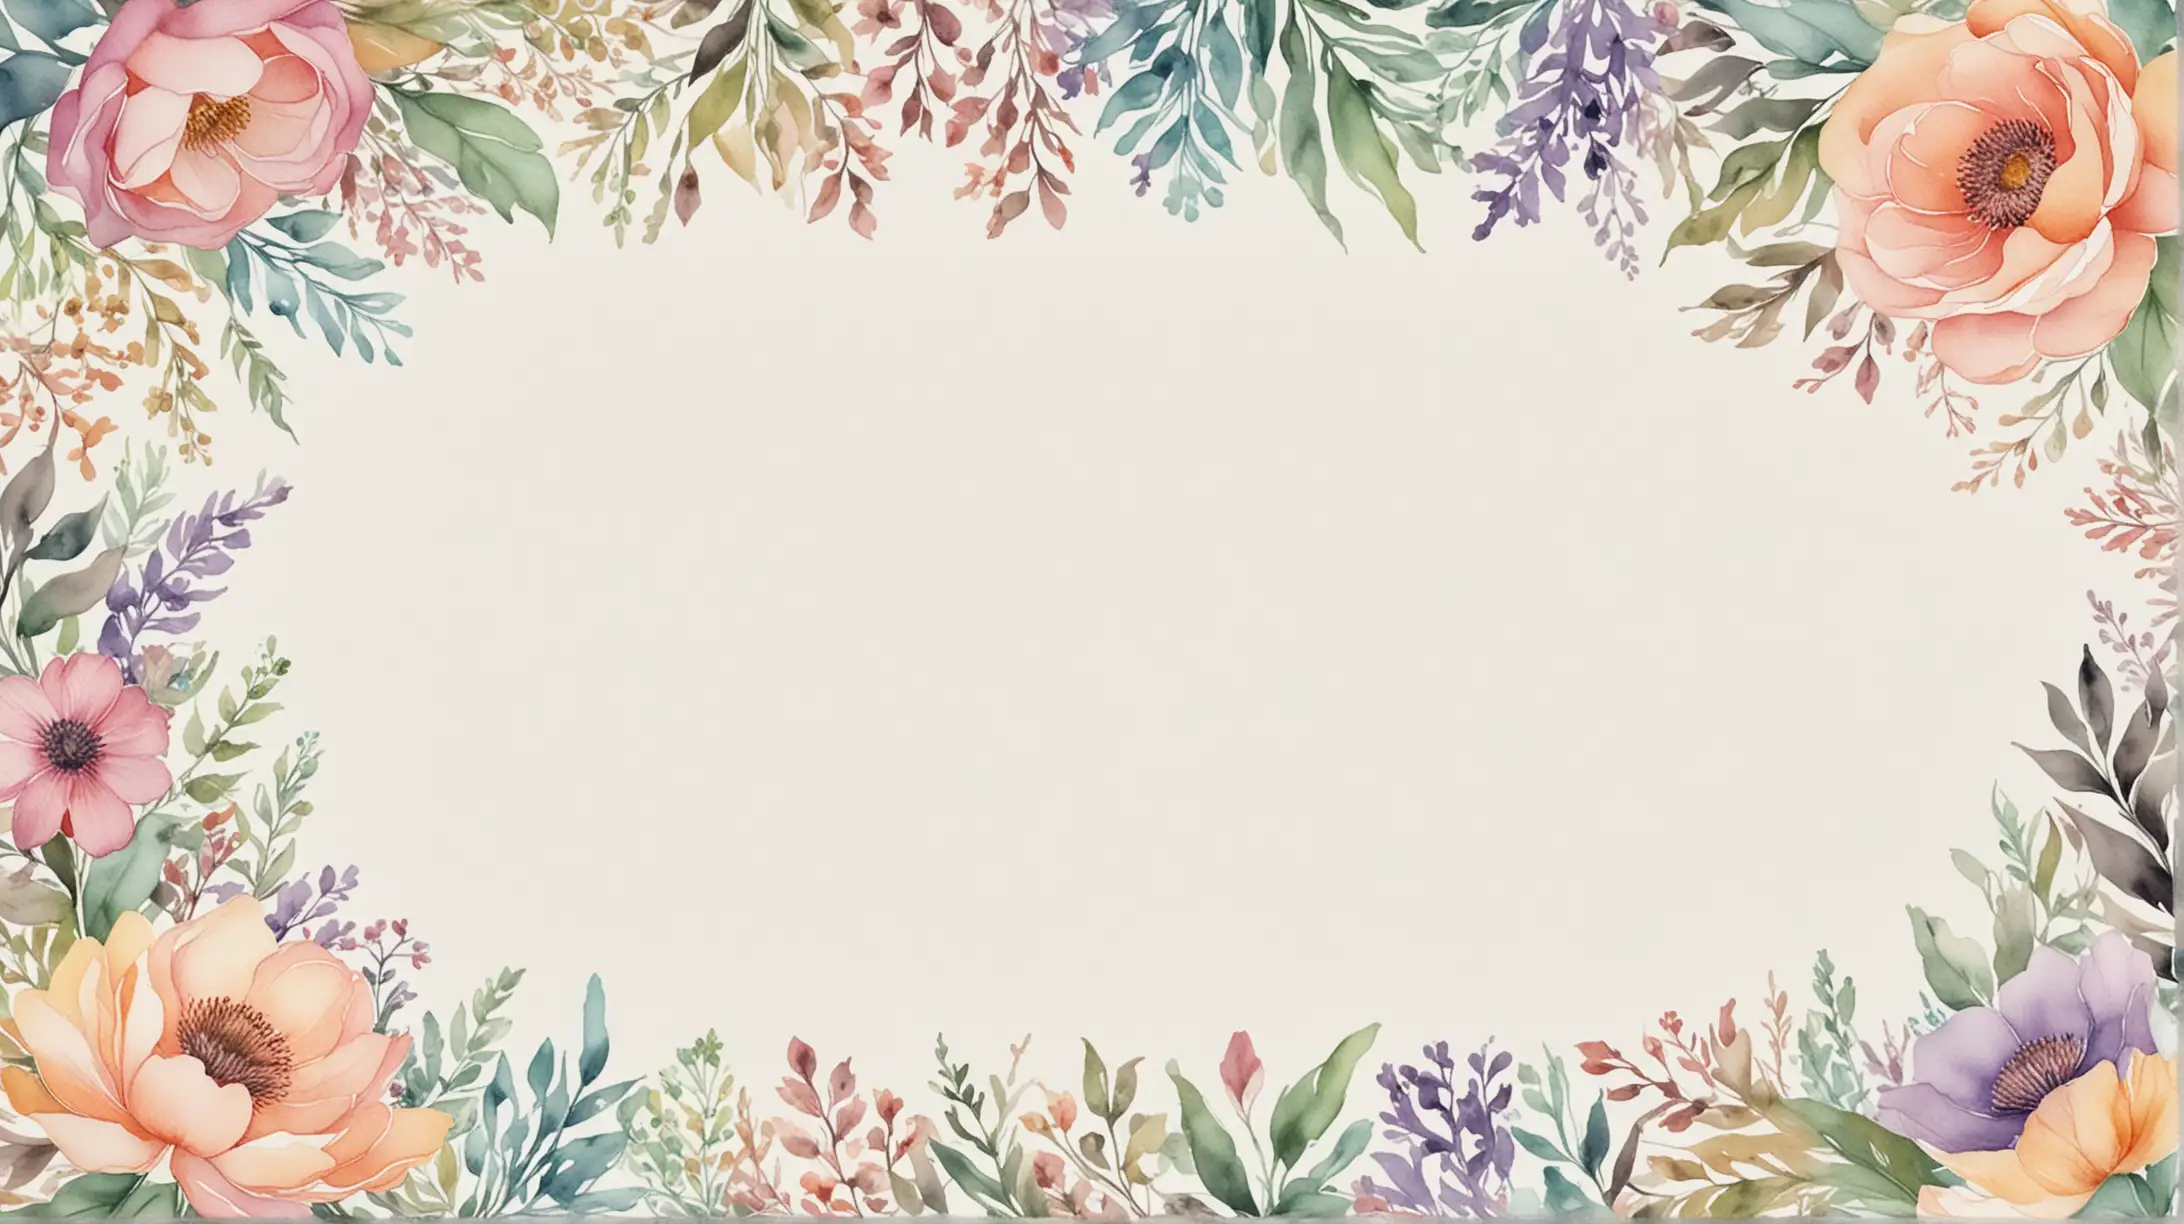 Generate a blank white page with detailed watercolor pastel floral design along the borders.